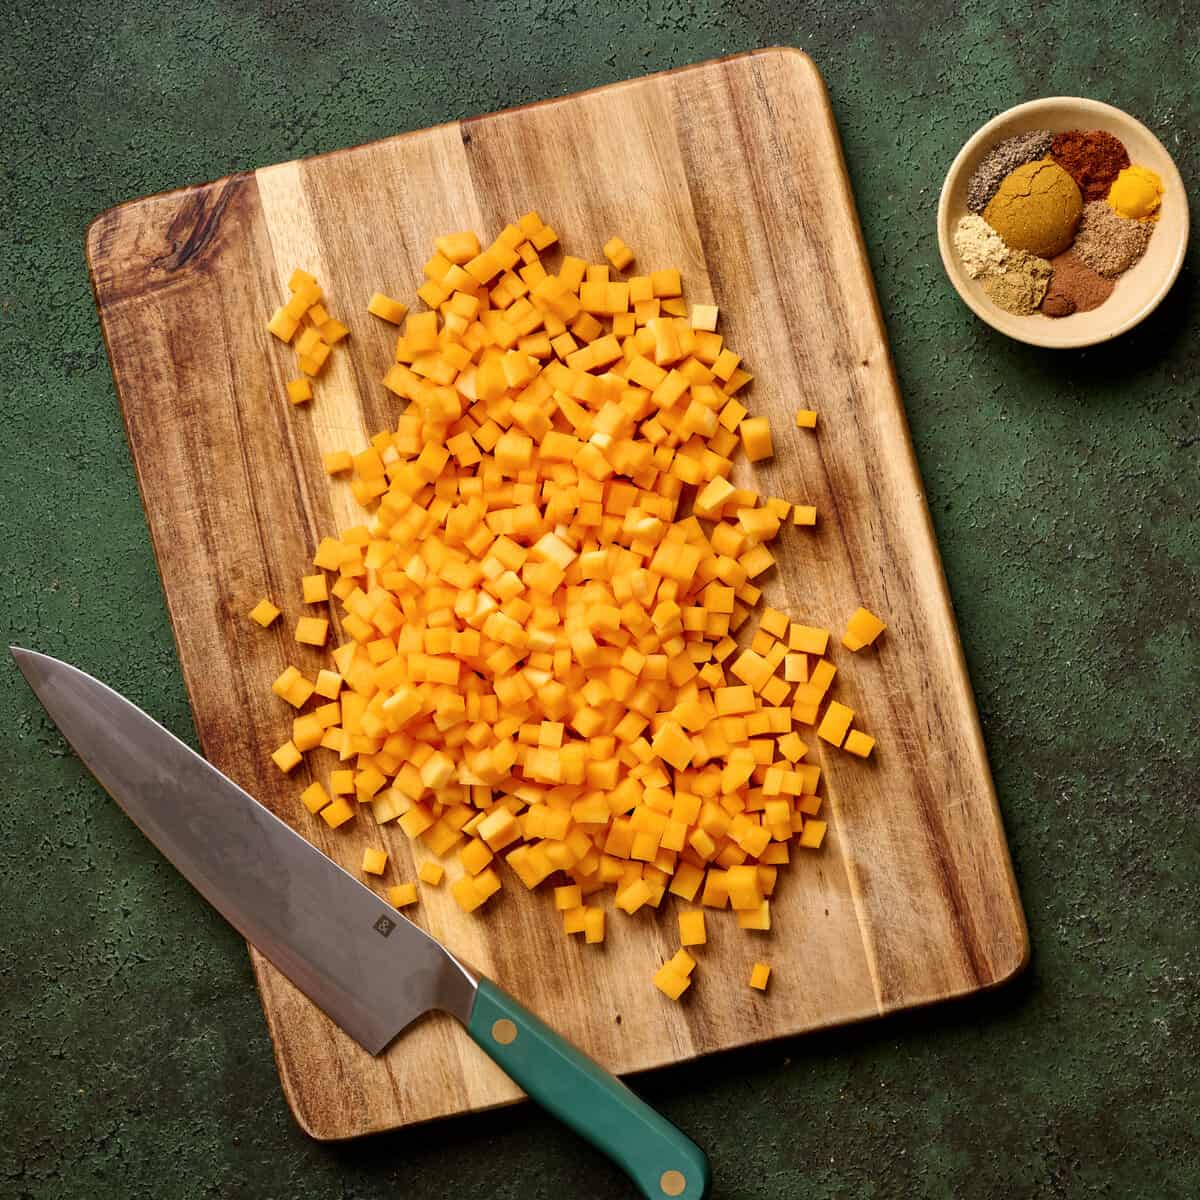 Small chopped butternut squash pieces on a wooden cutting board with a knife.